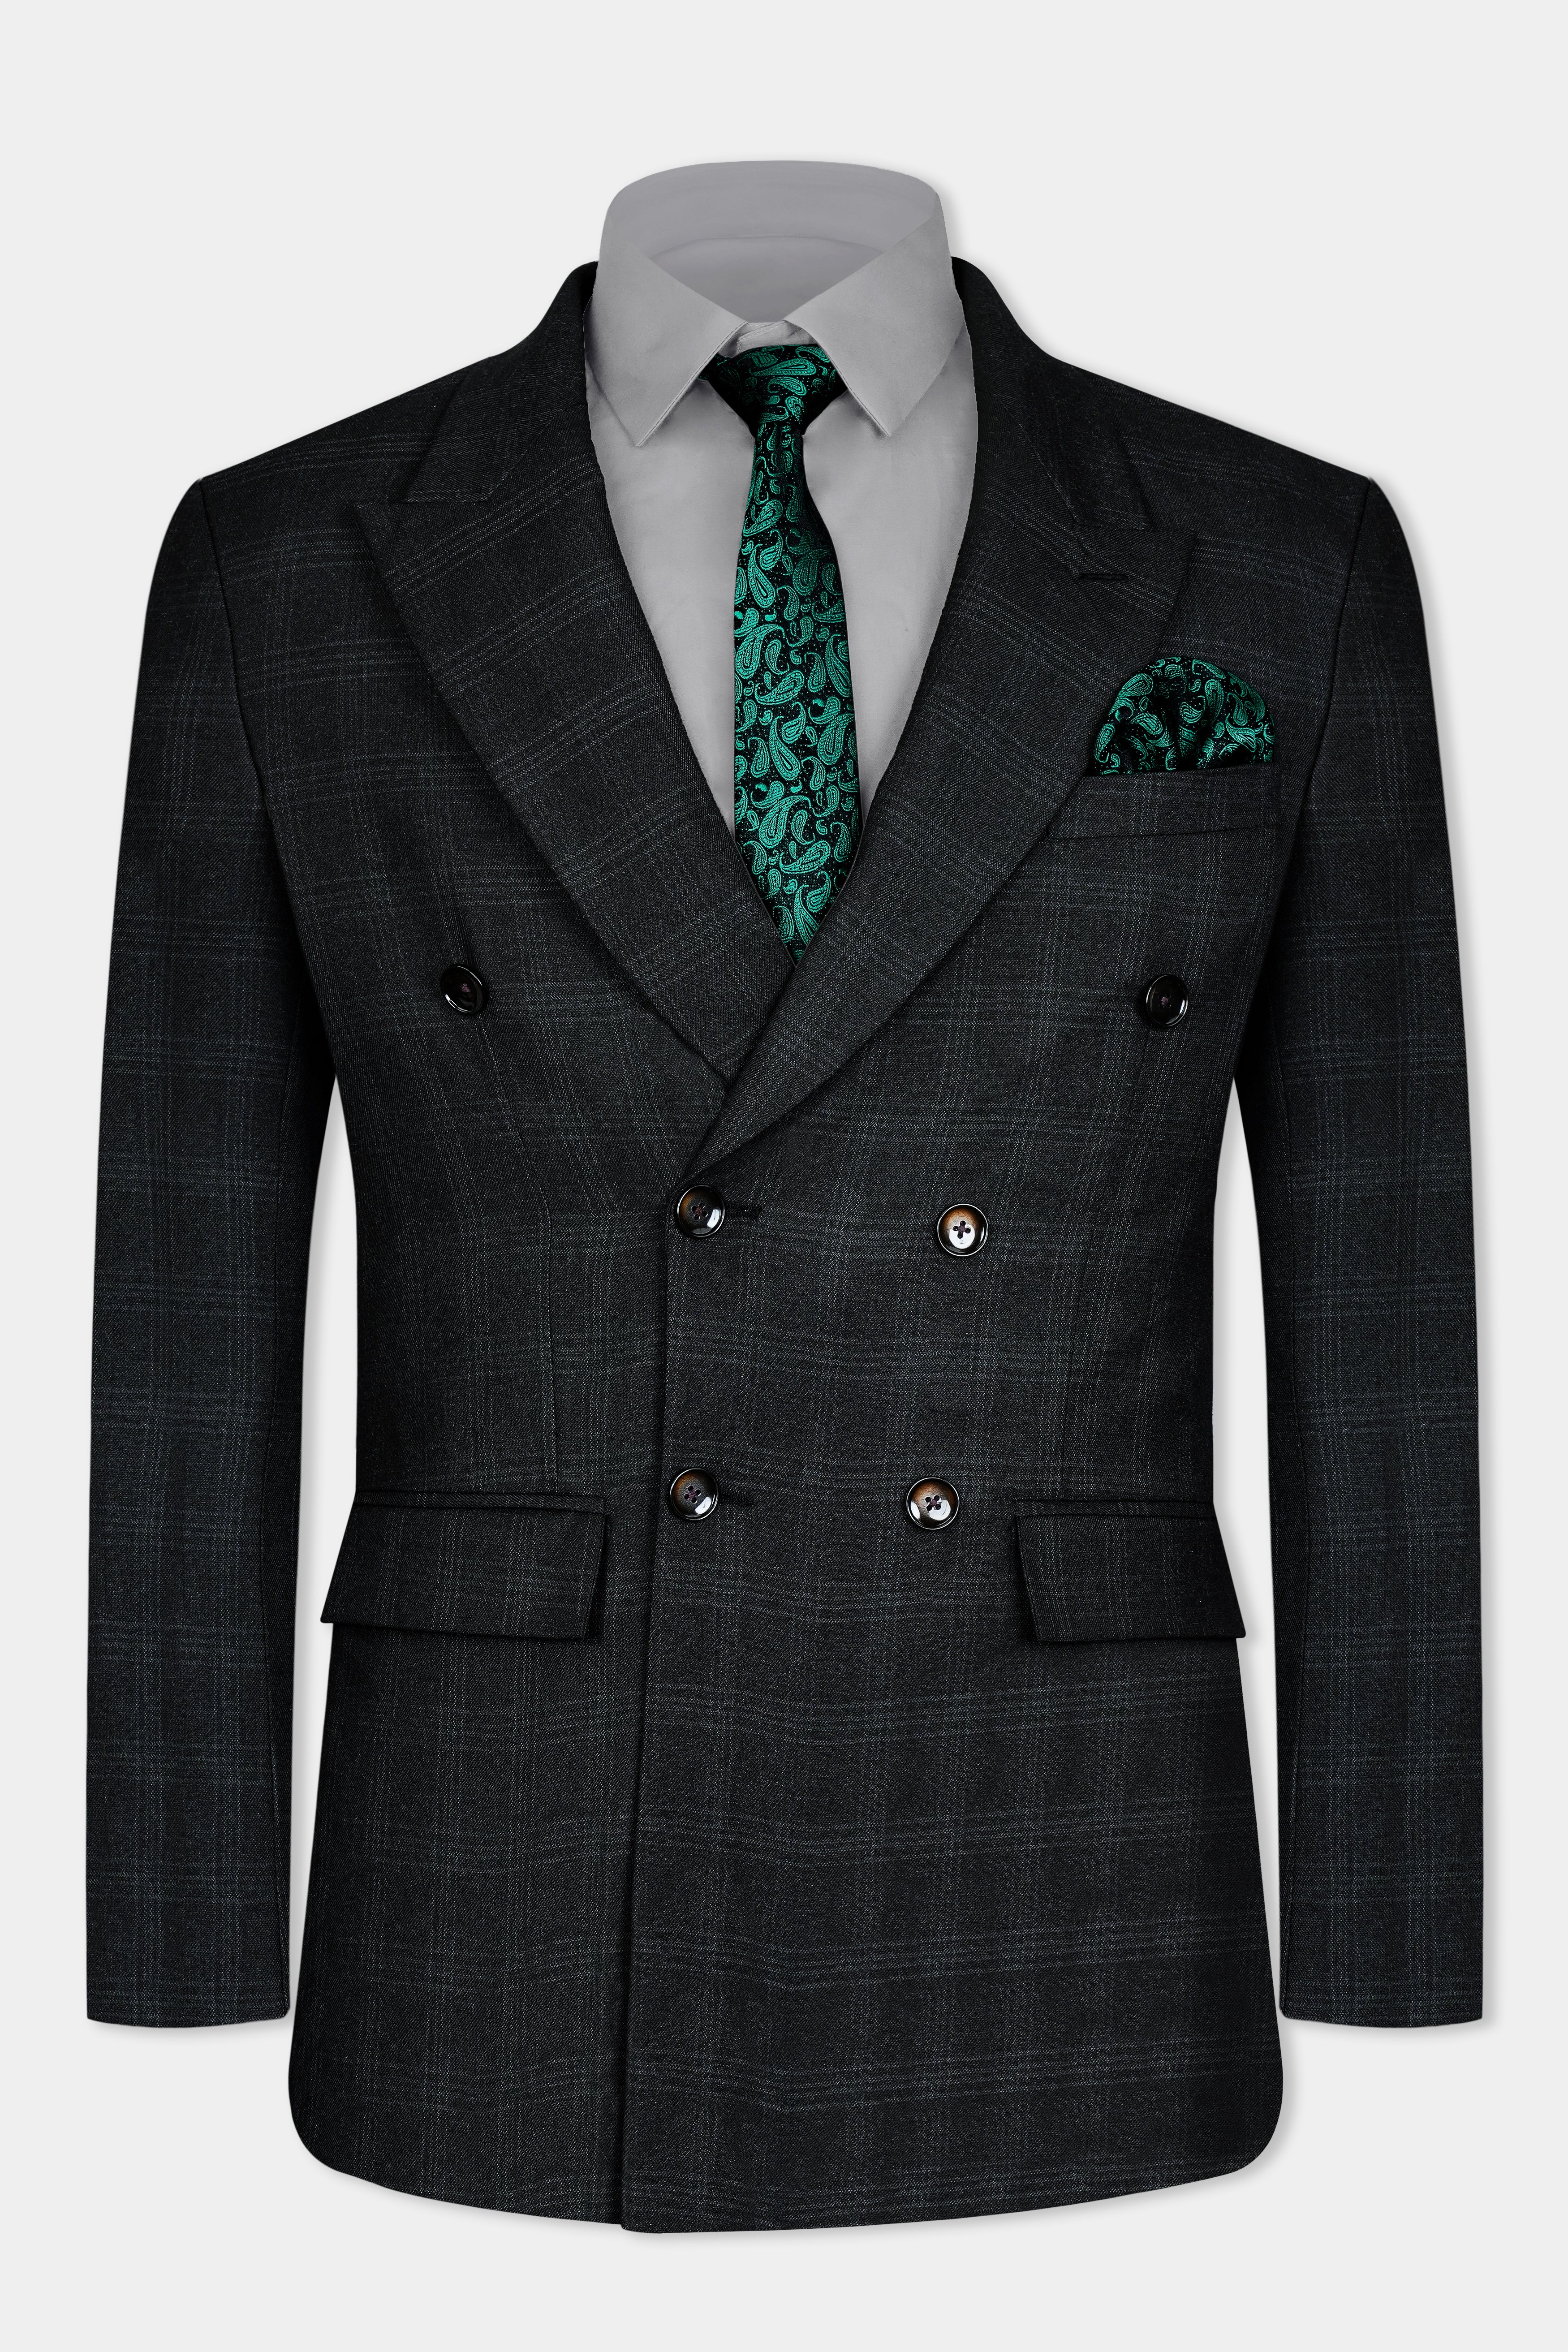 Onyx Black Subtle Checkered Wool Rich Double Breasted Blazer